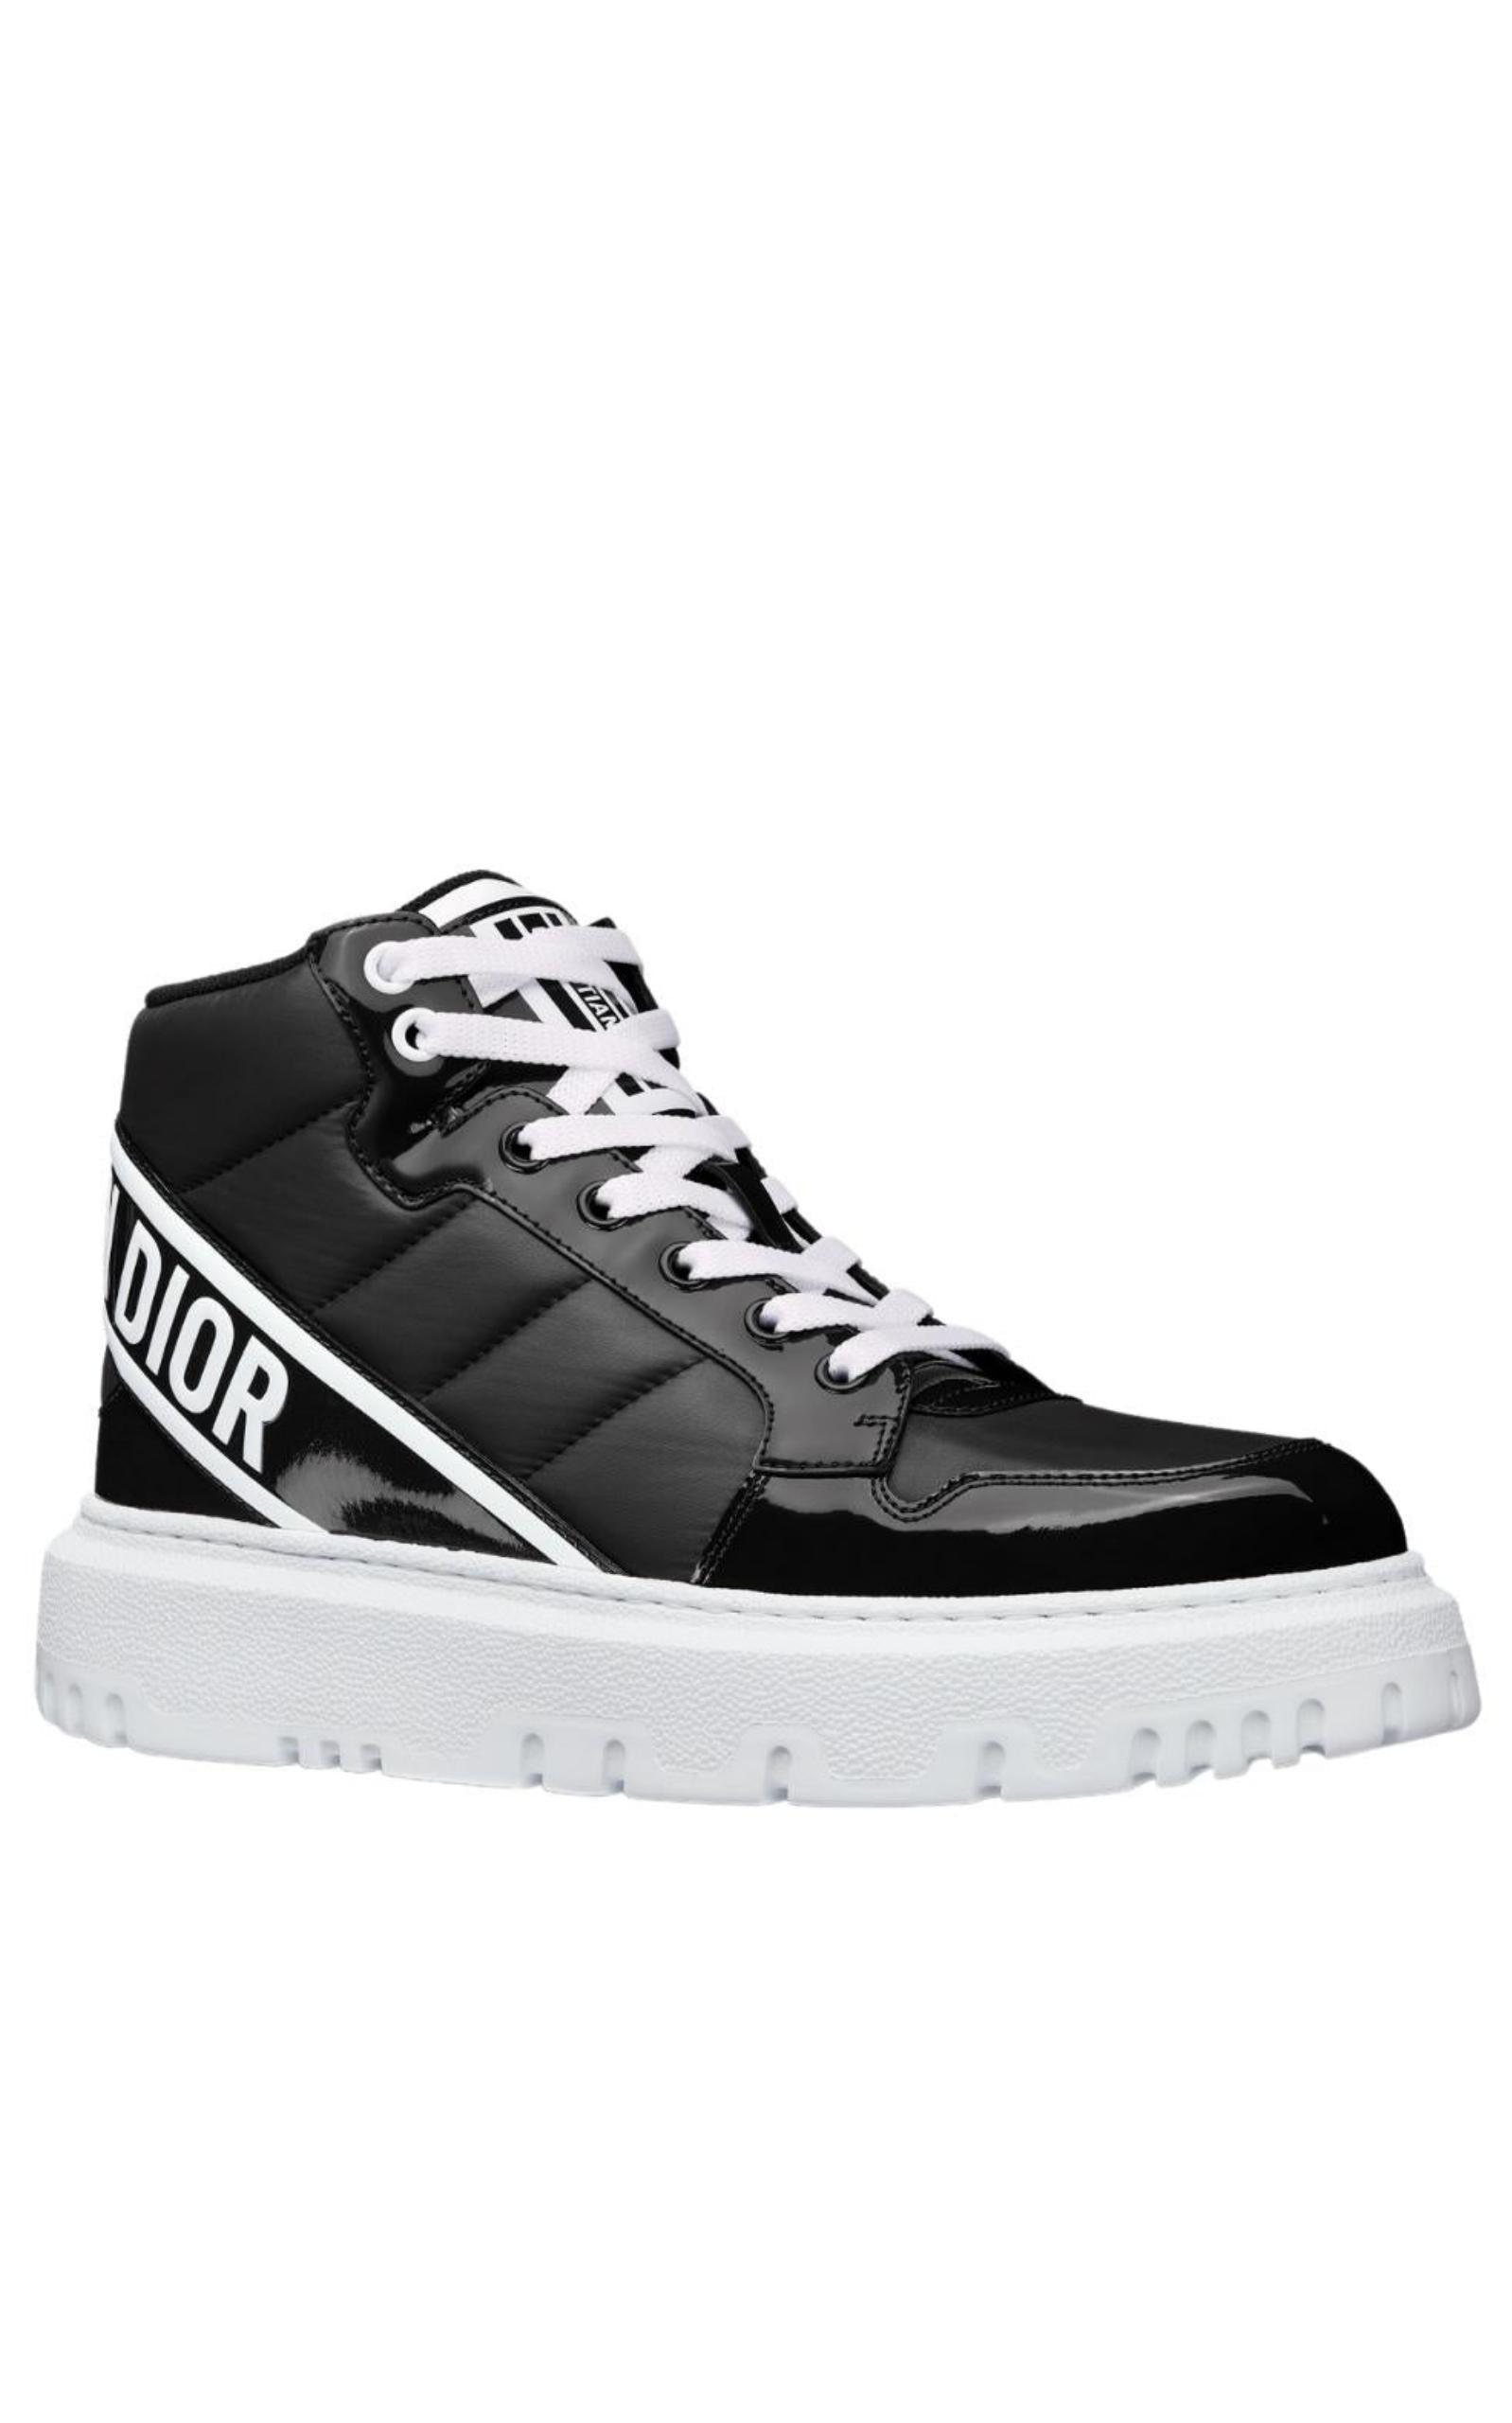 ORIGINAL REPLAY SNEAKERS SHOES THICK SOLE BACK PROMINENT BRAND LOGO FOR  BOYS